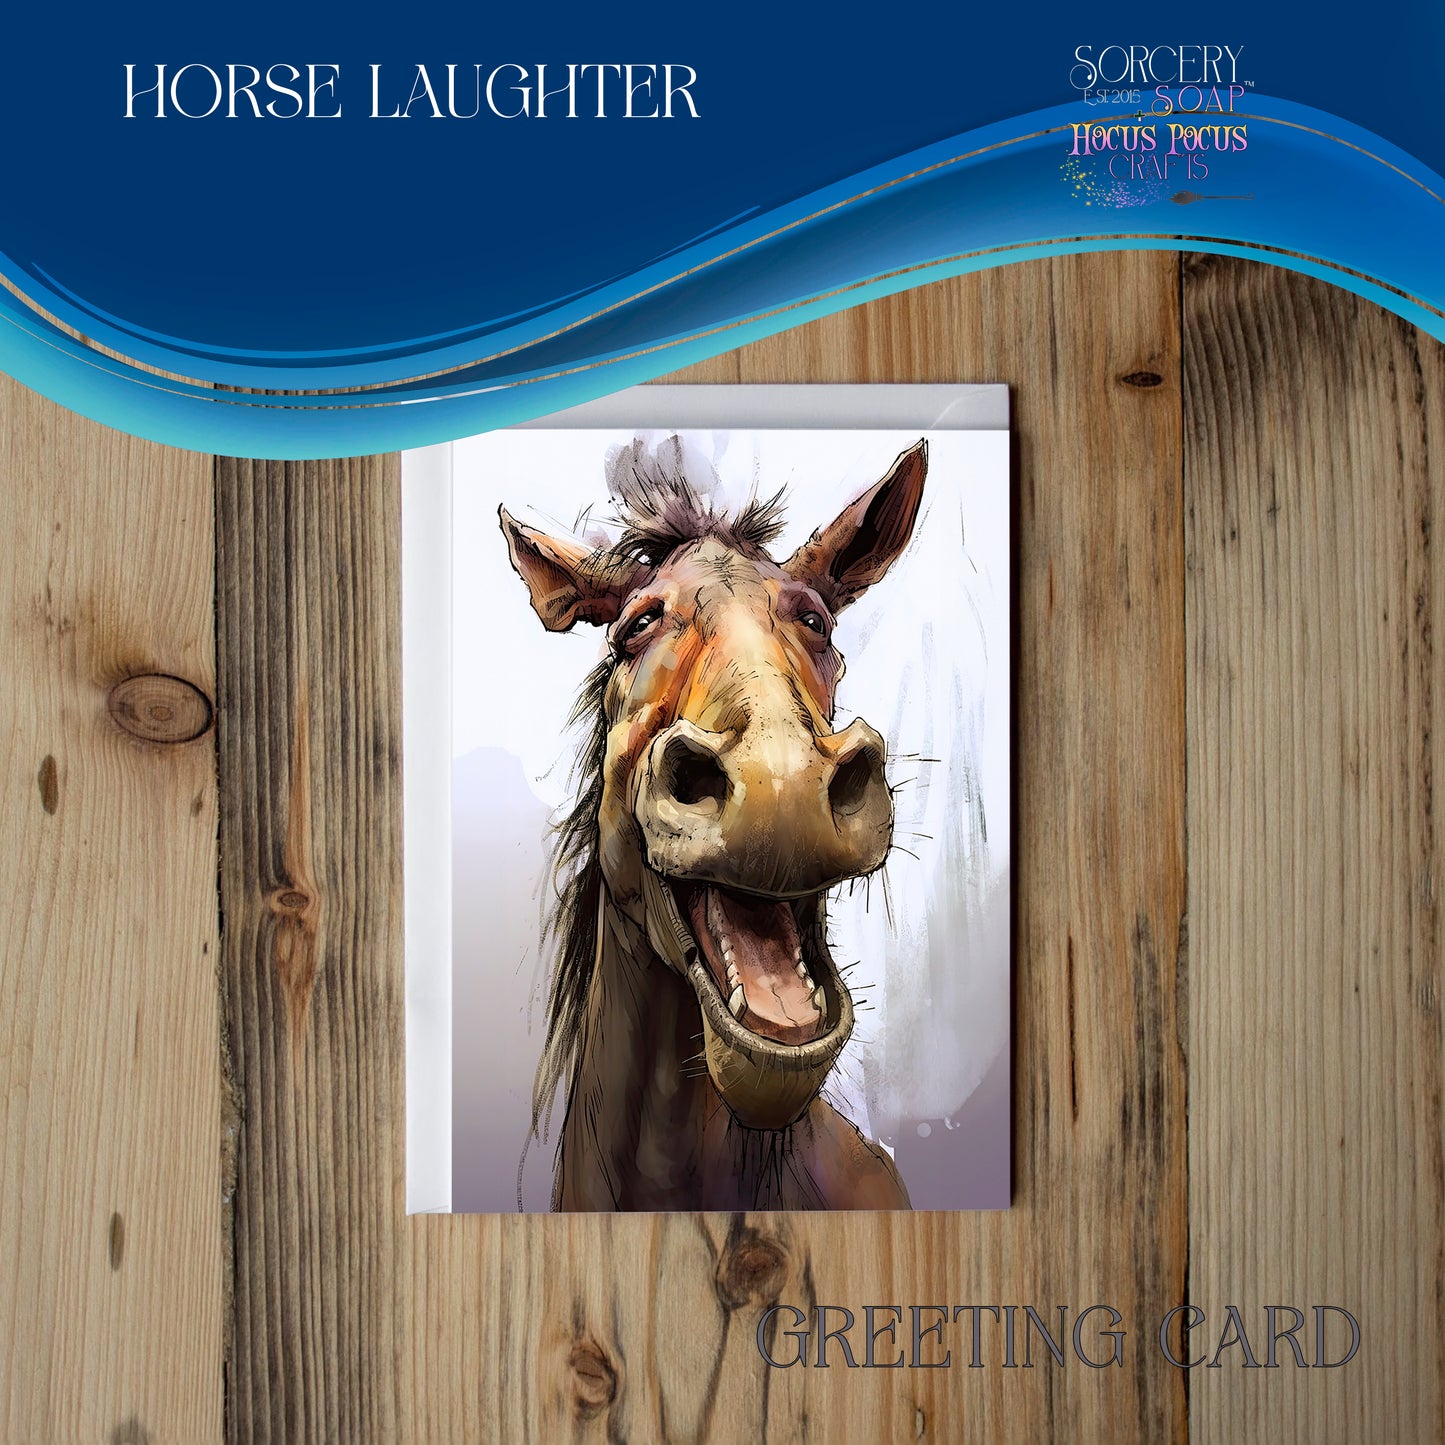 Horse Laughter Greeting Cards